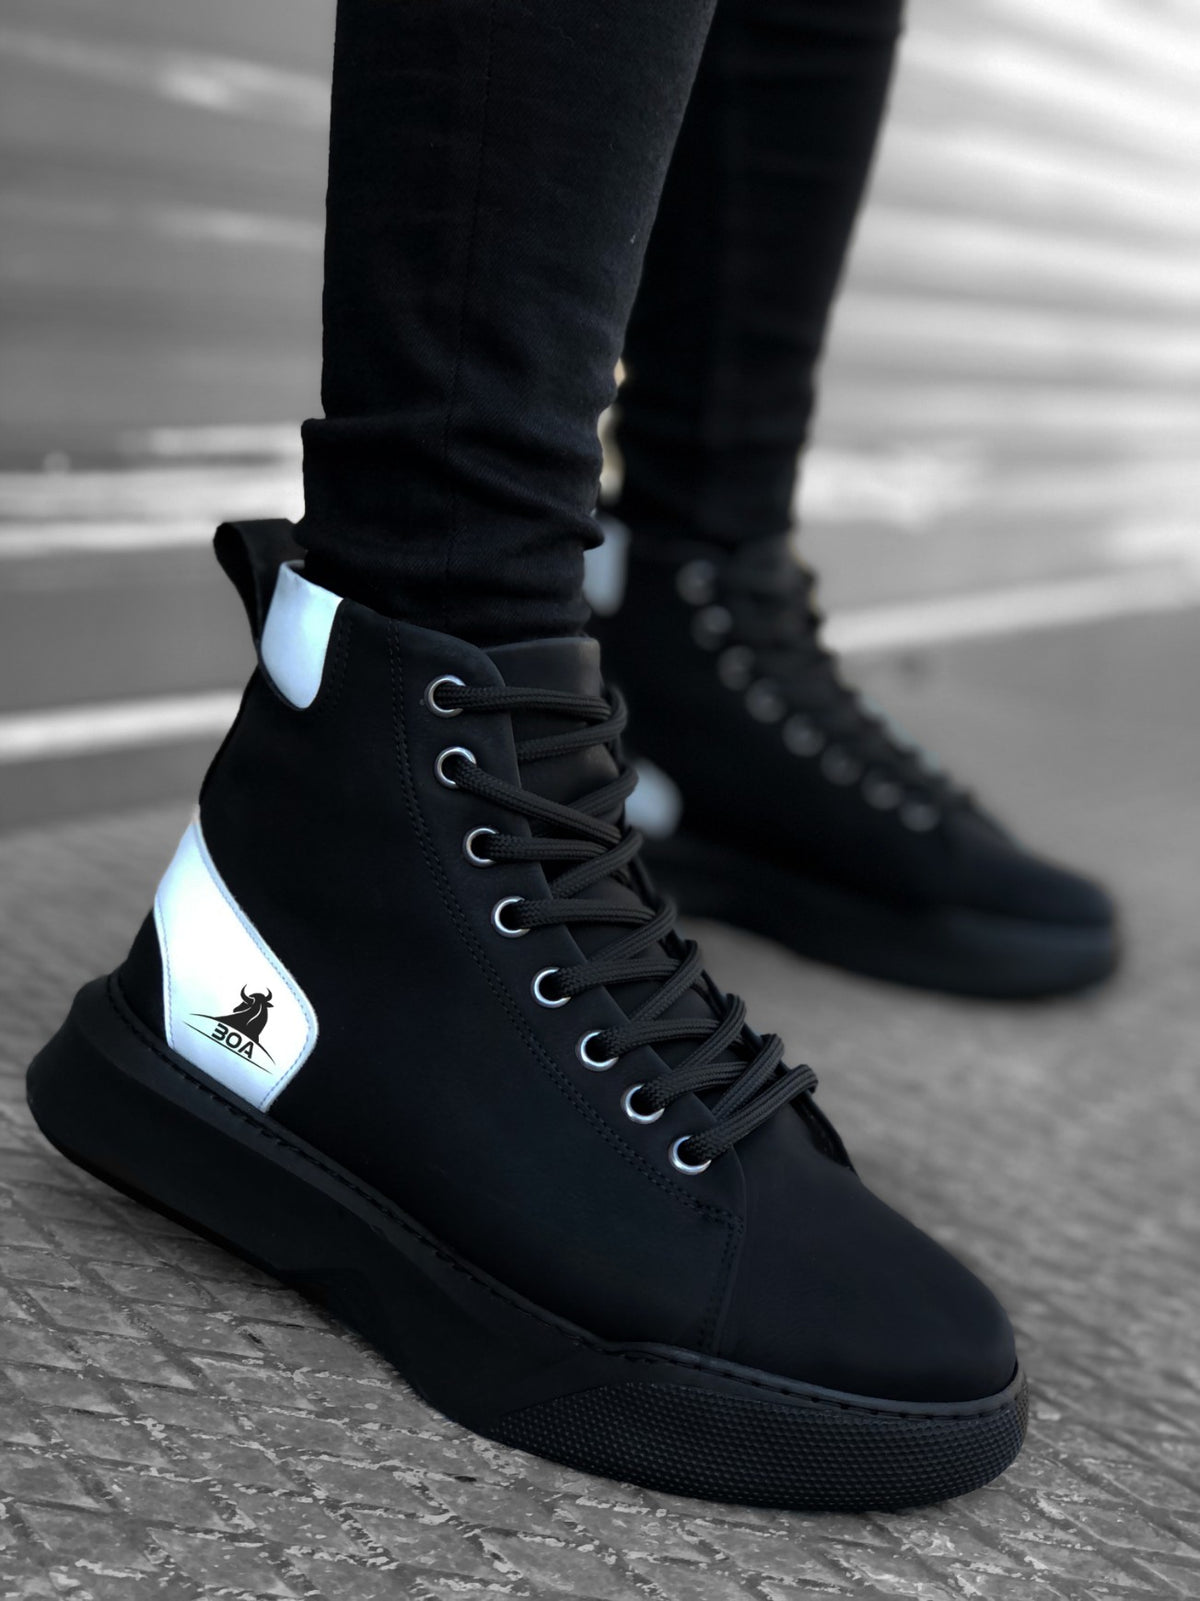 BA0155 Lace-Up Men's High Sole Black White Sport Boots - STREETMODE ™